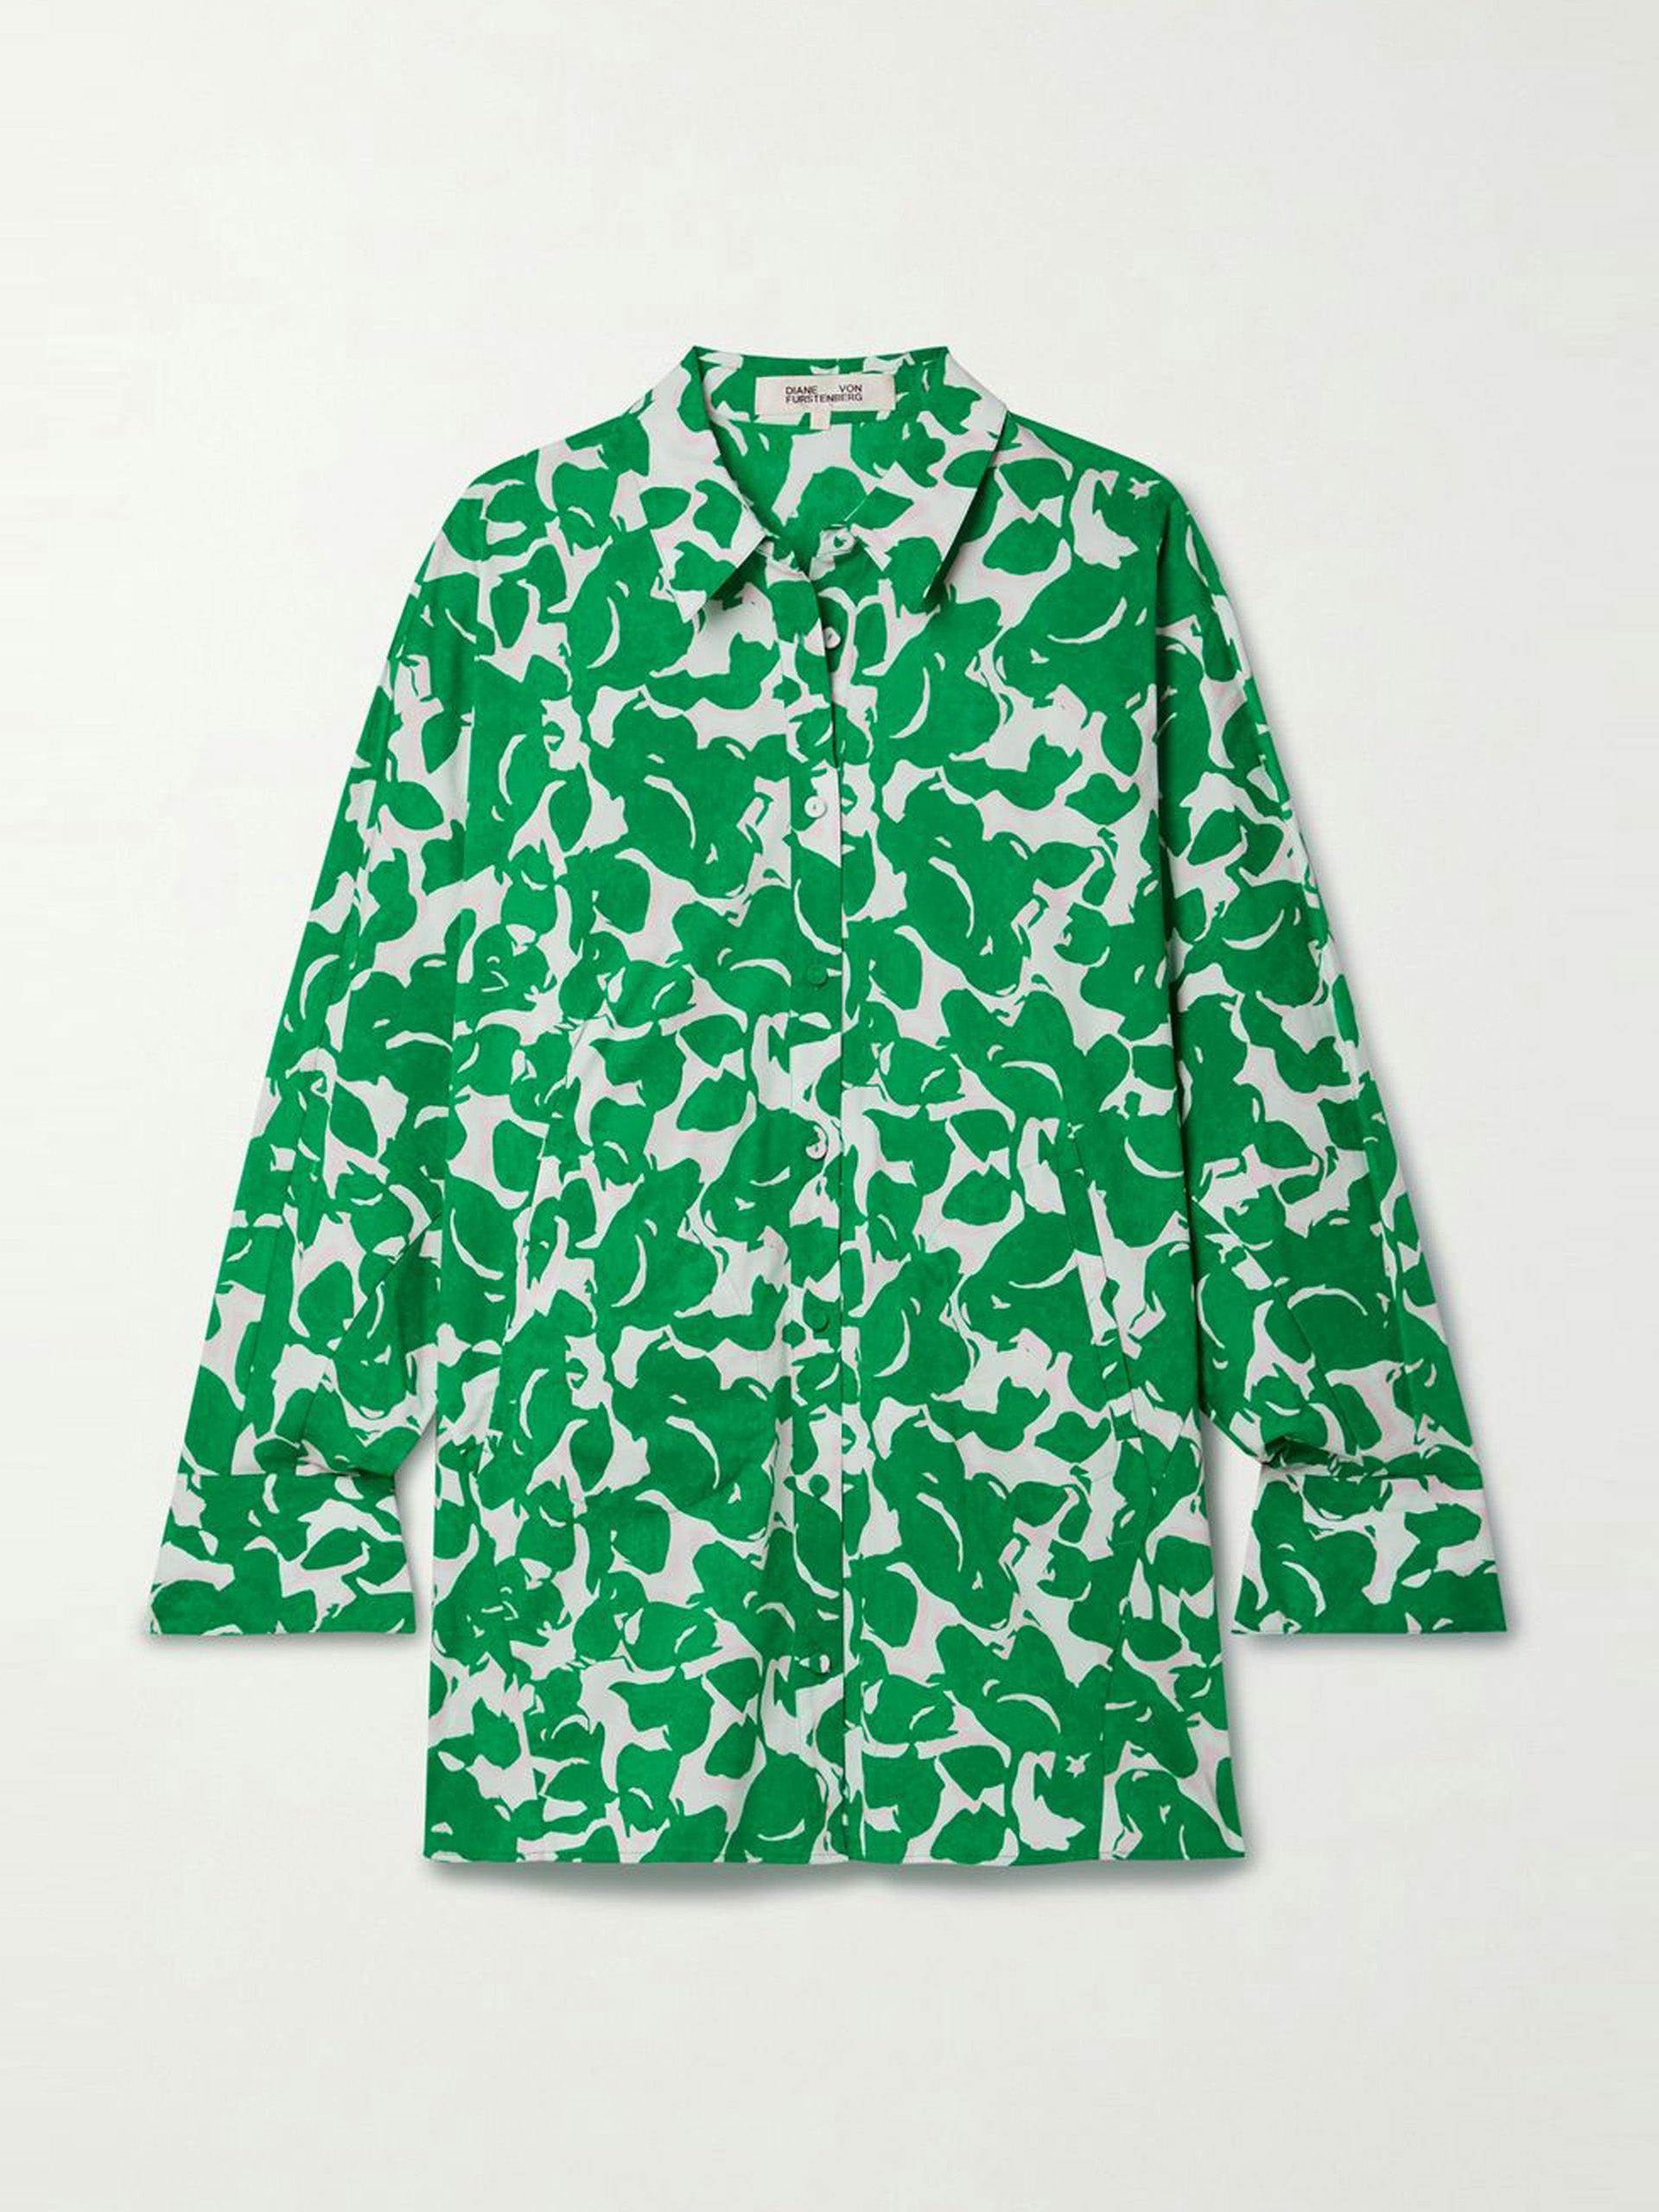 Green and white oversized shirt